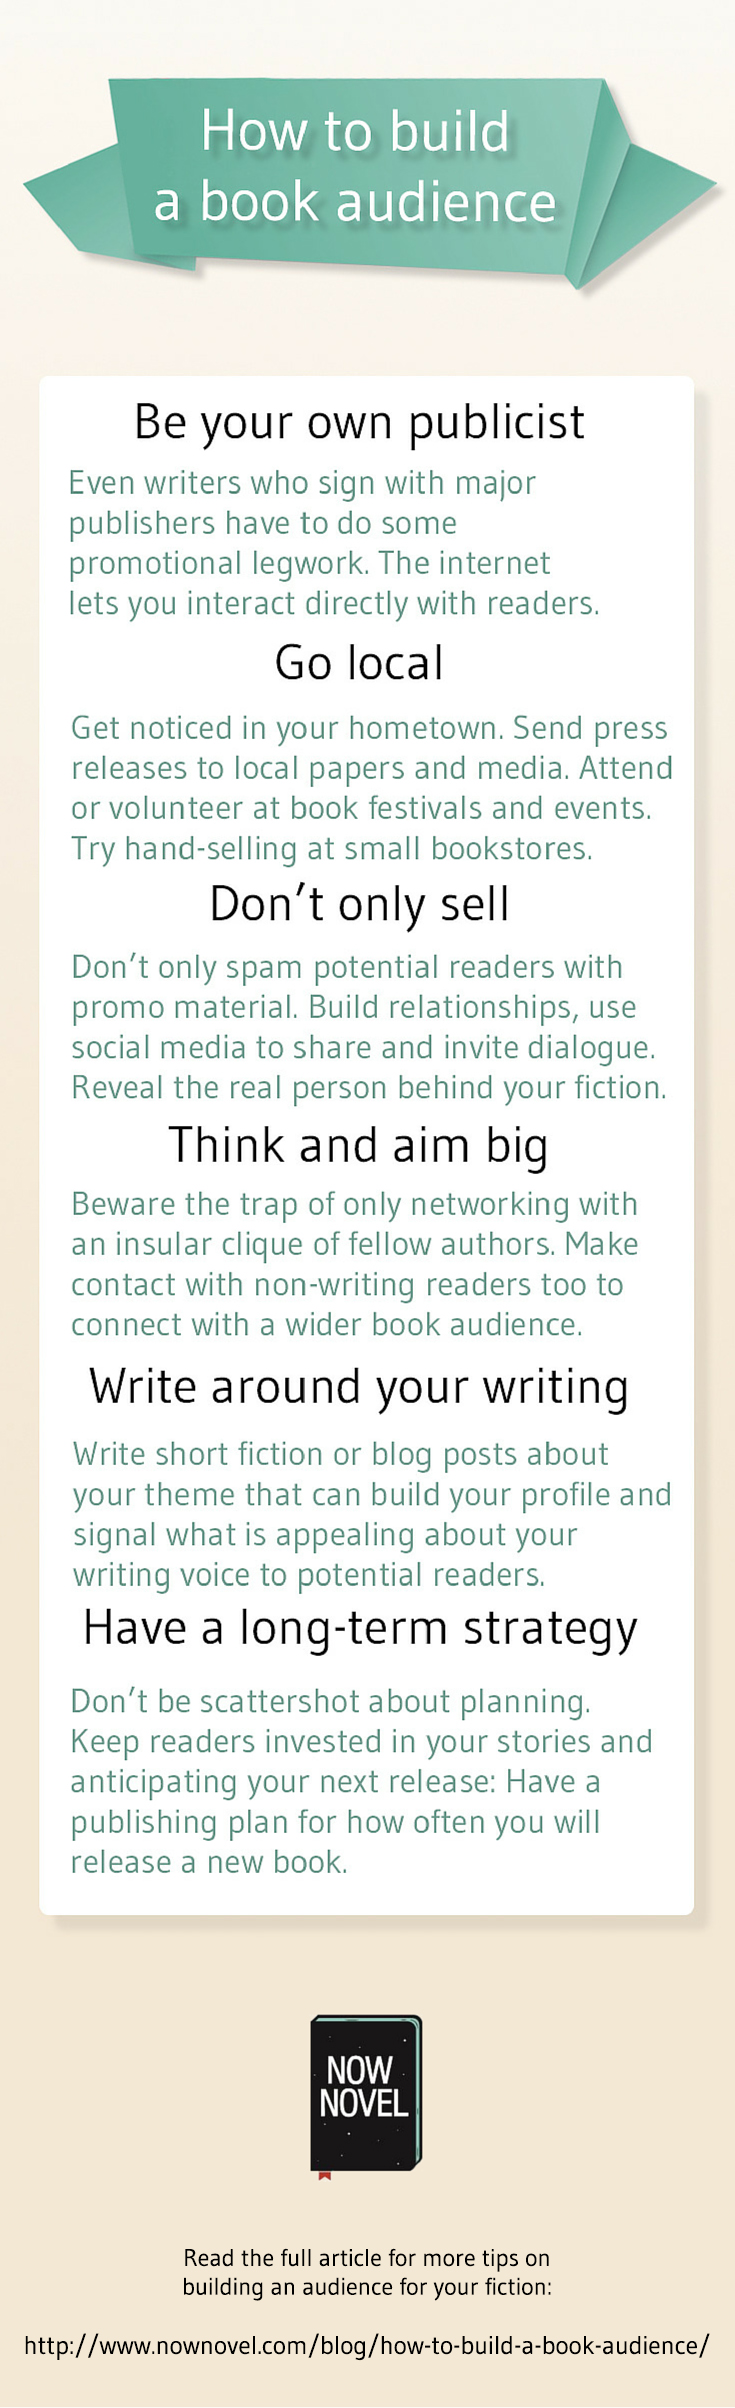 How to build a book audience - writing infographic